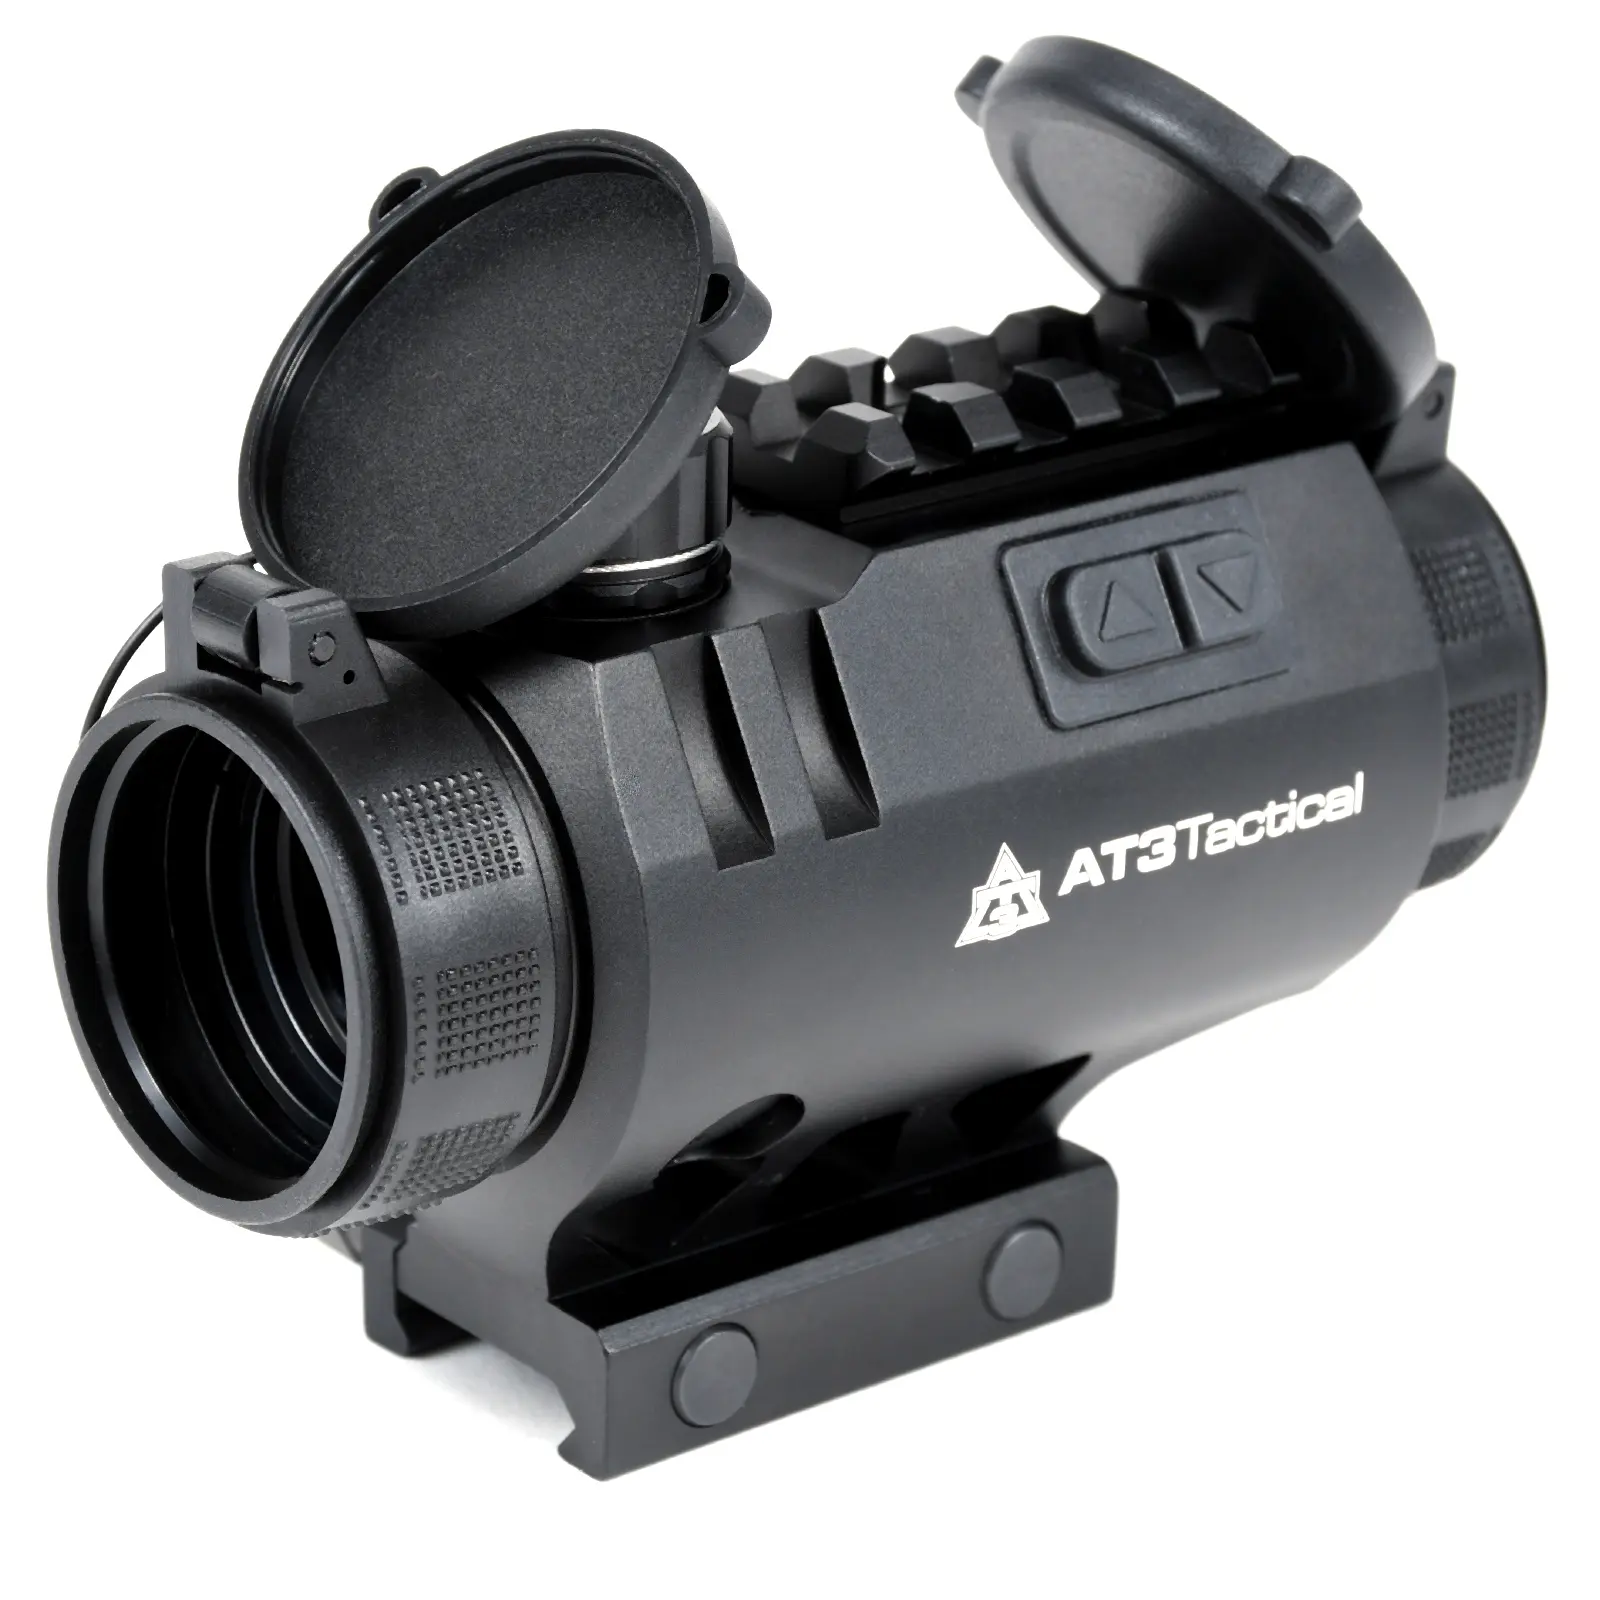 AT3™ 3xP Scope - 3x Prism Scope with Illuminated BDC Reticle